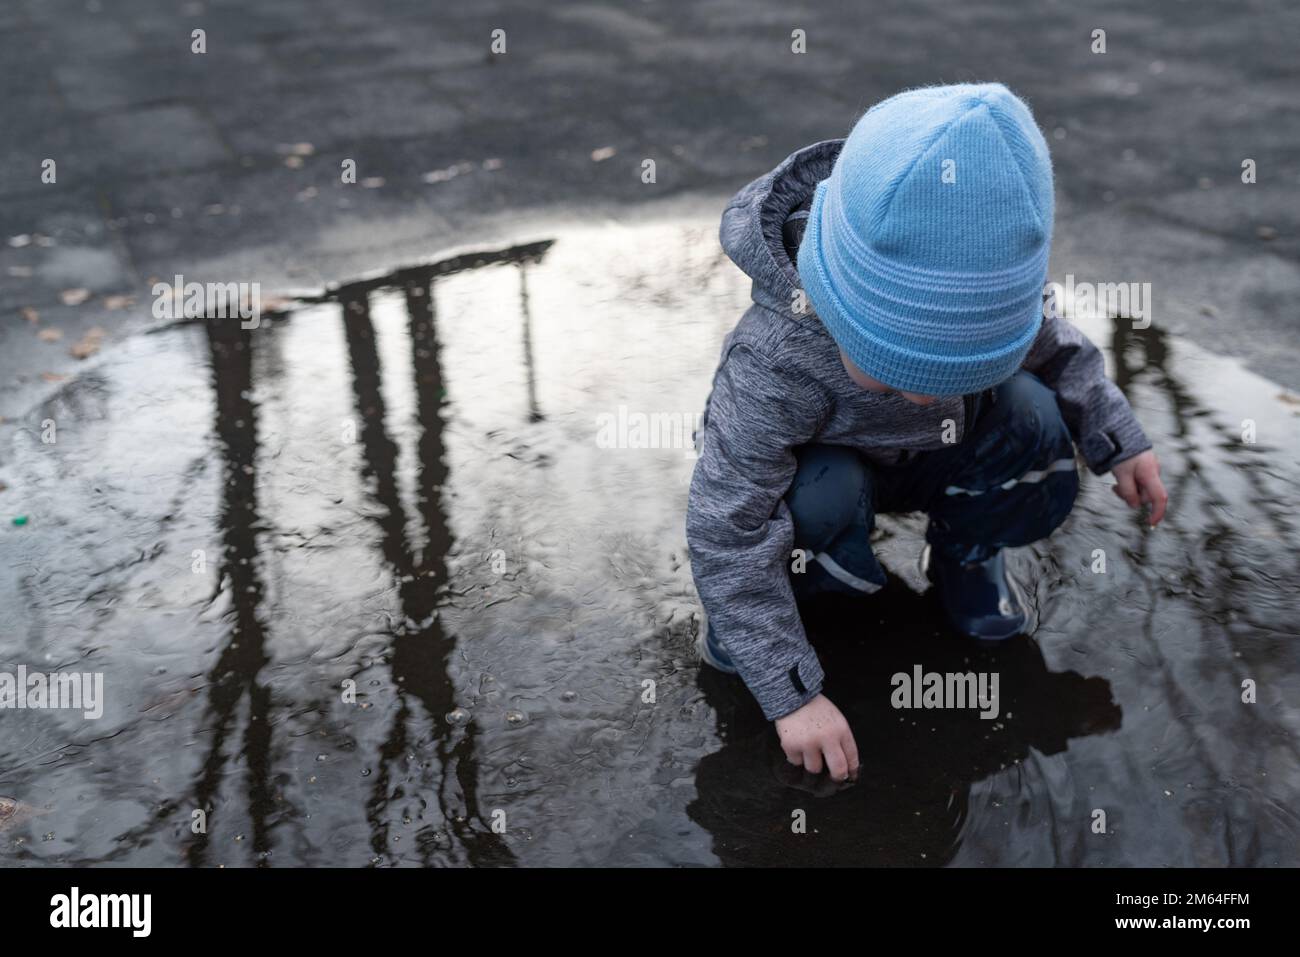 two year old boy in rain pants and rubber boots playing in puddle of water after rain shower Stock Photo